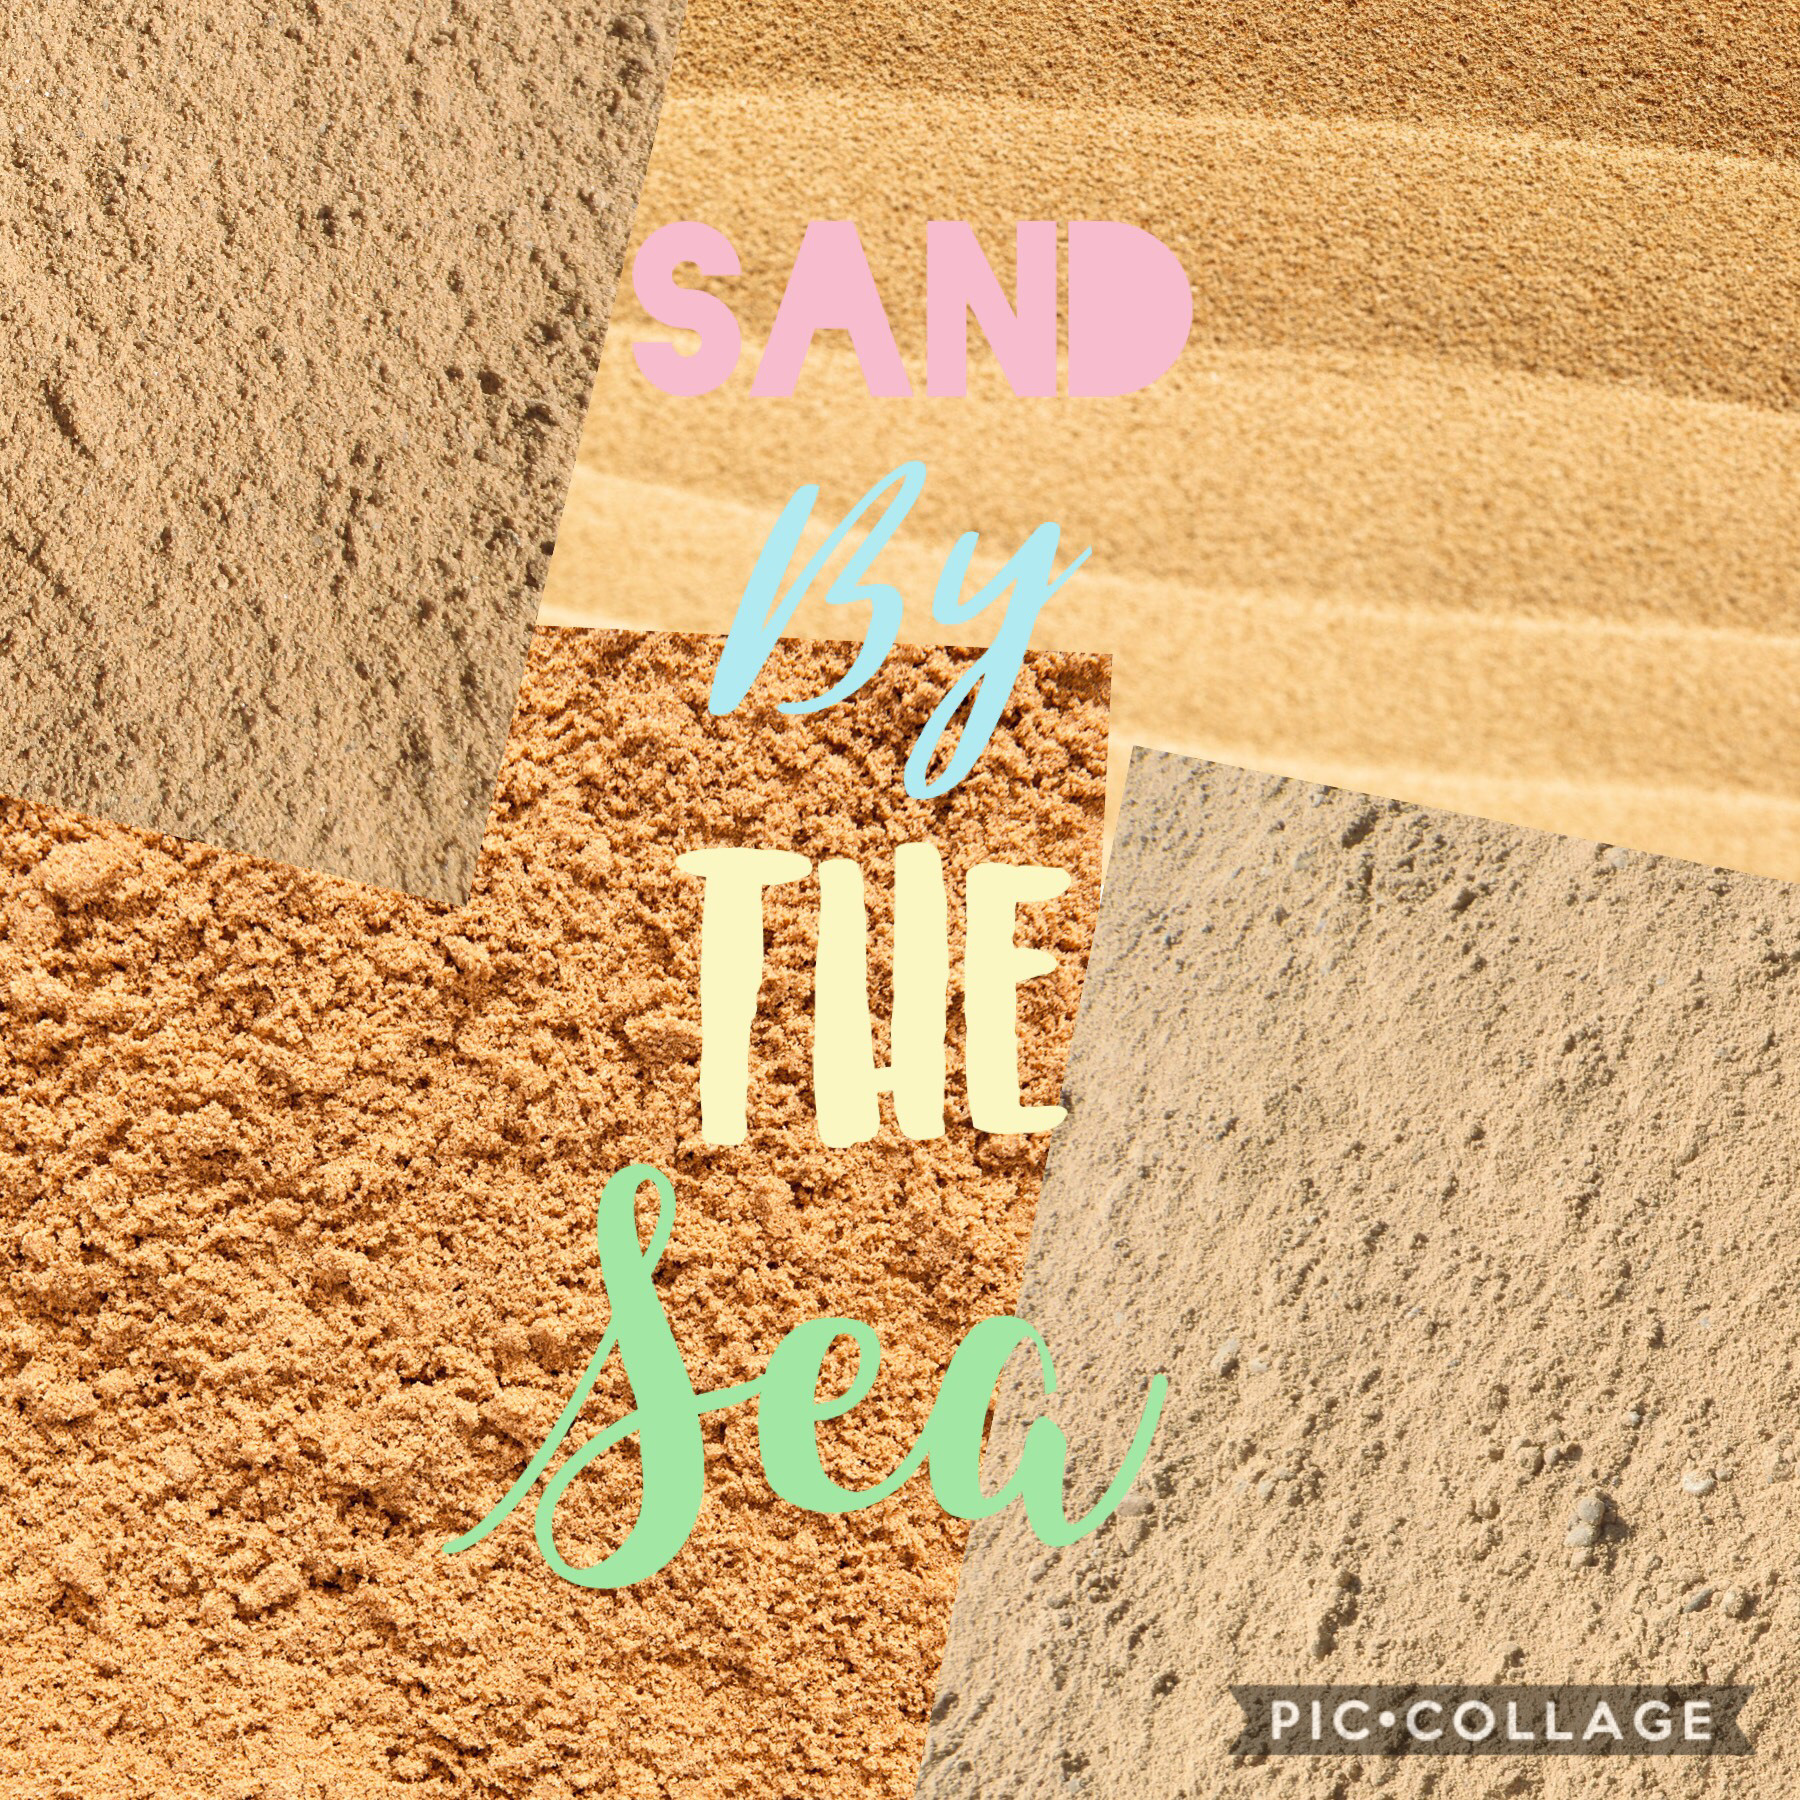 Sand by the sea! (Sorry I haven’t been active)